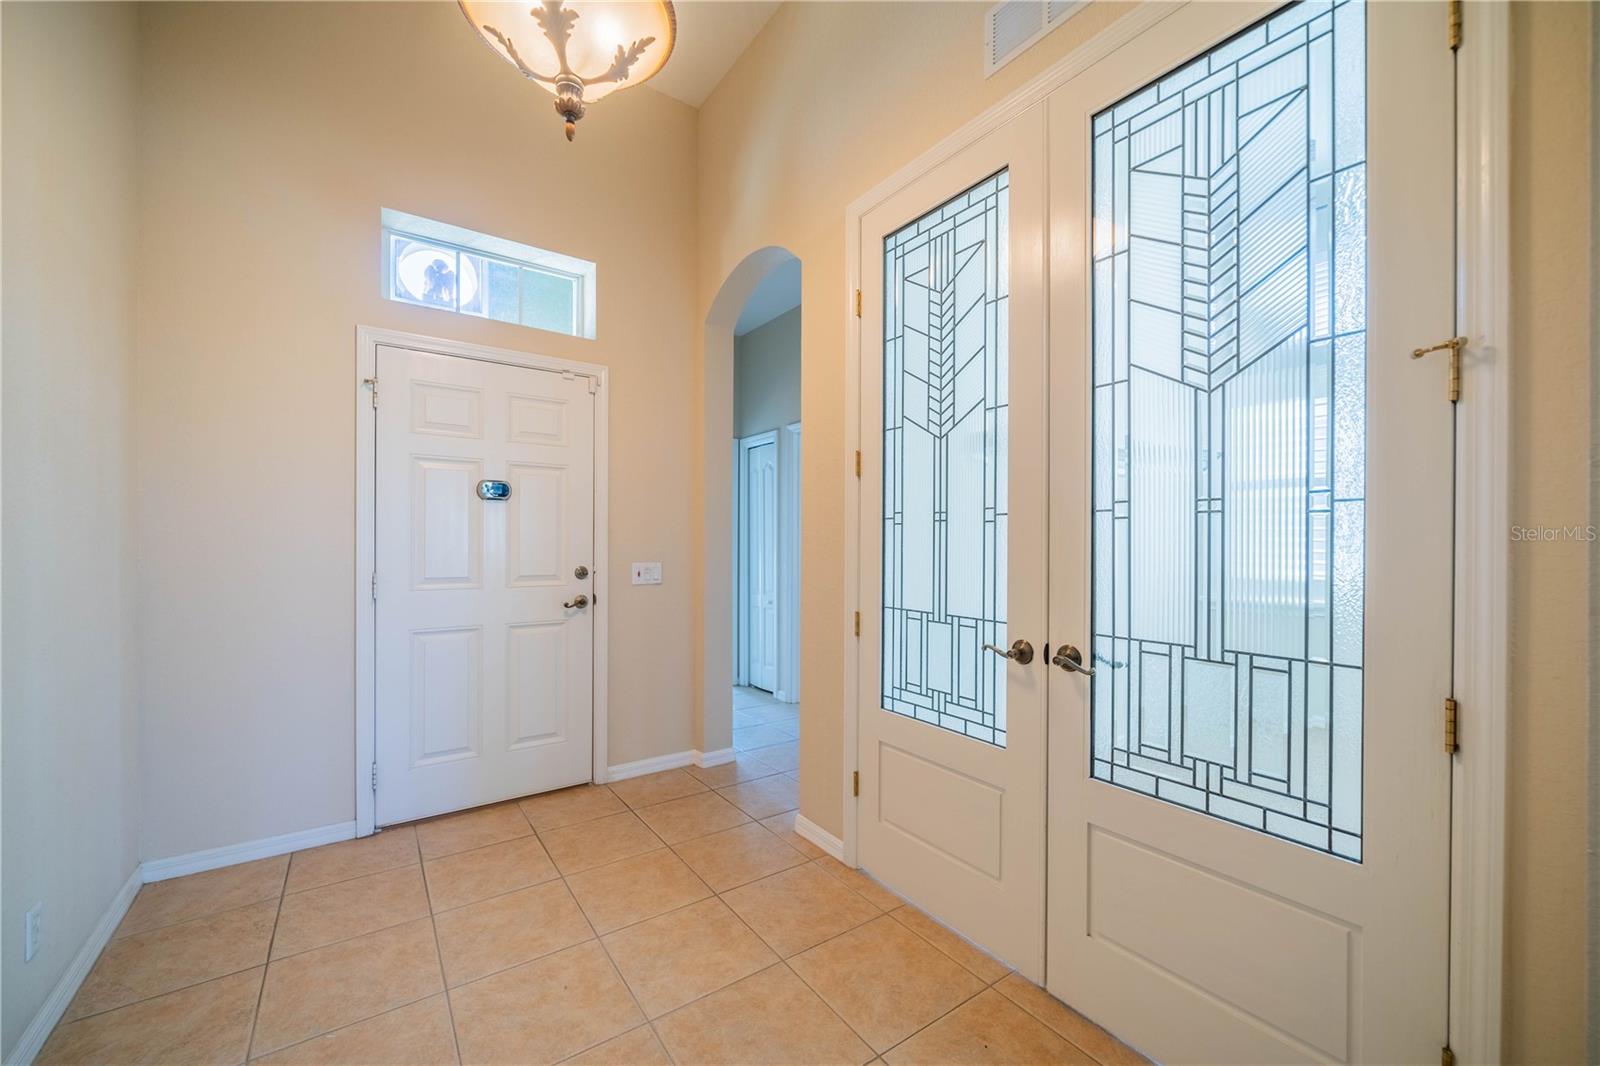 Foyer and stained glass doors to den